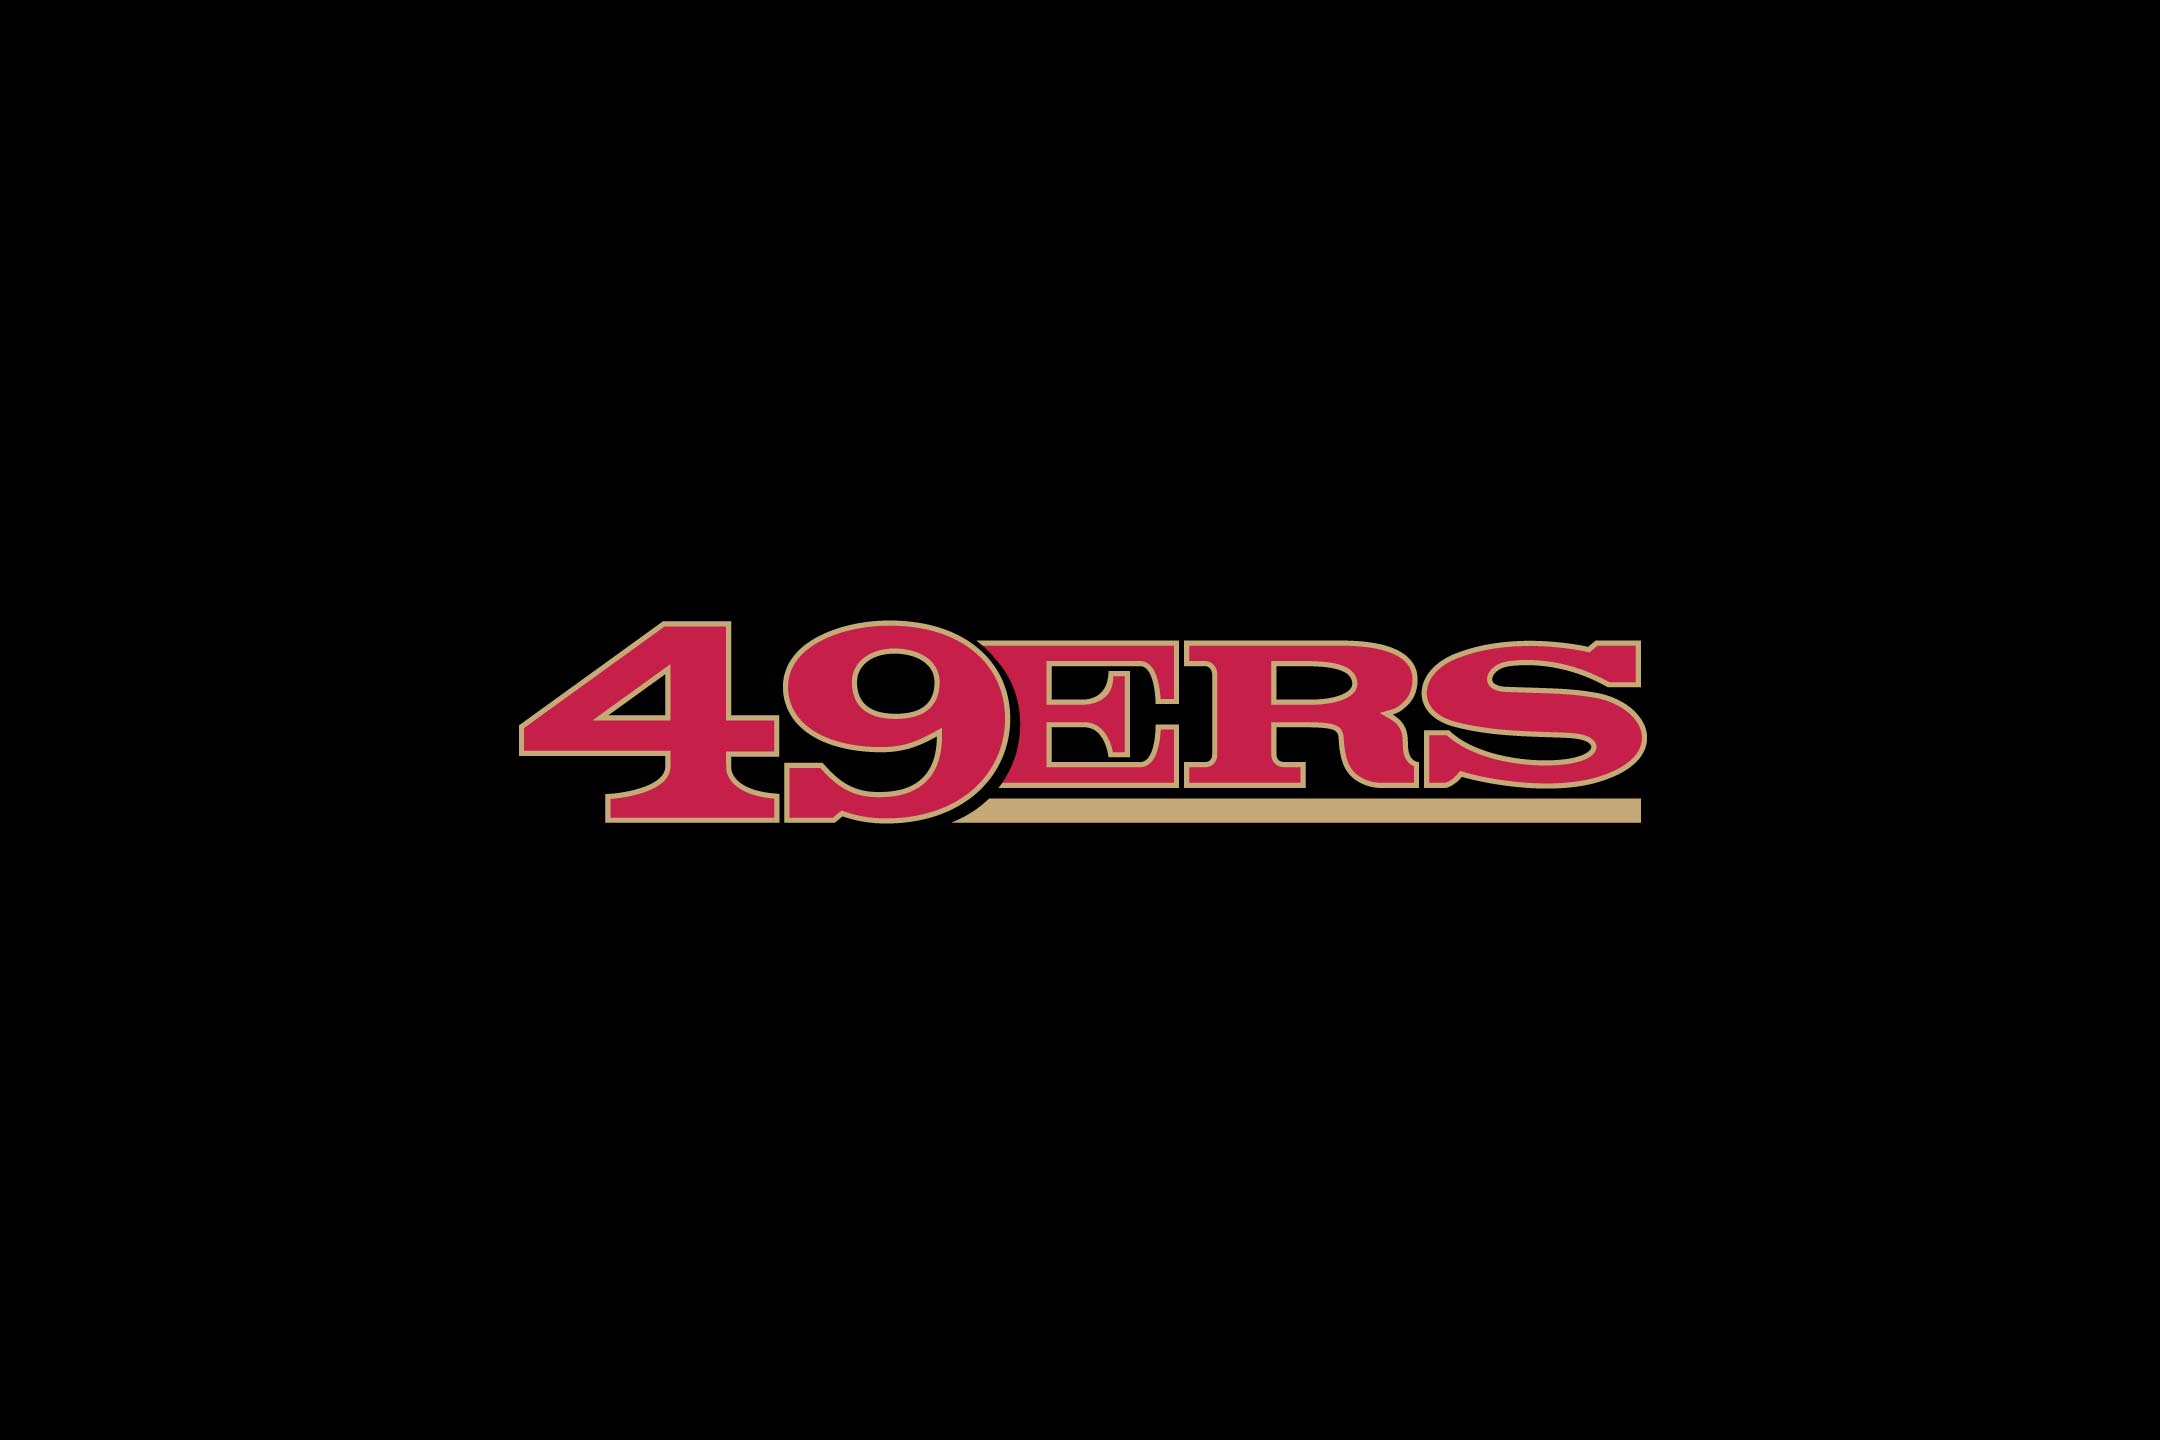 2160x1440 Free download san francisco 49ers wallpapers 1 0 [] for your Desktop, Mobile \u0026 Tablet | Explore 47+ SF Niners Wallpaper | SF Niners Wallpaper, Sf Giants Wallpaper, Sf 49ers Wallpaper